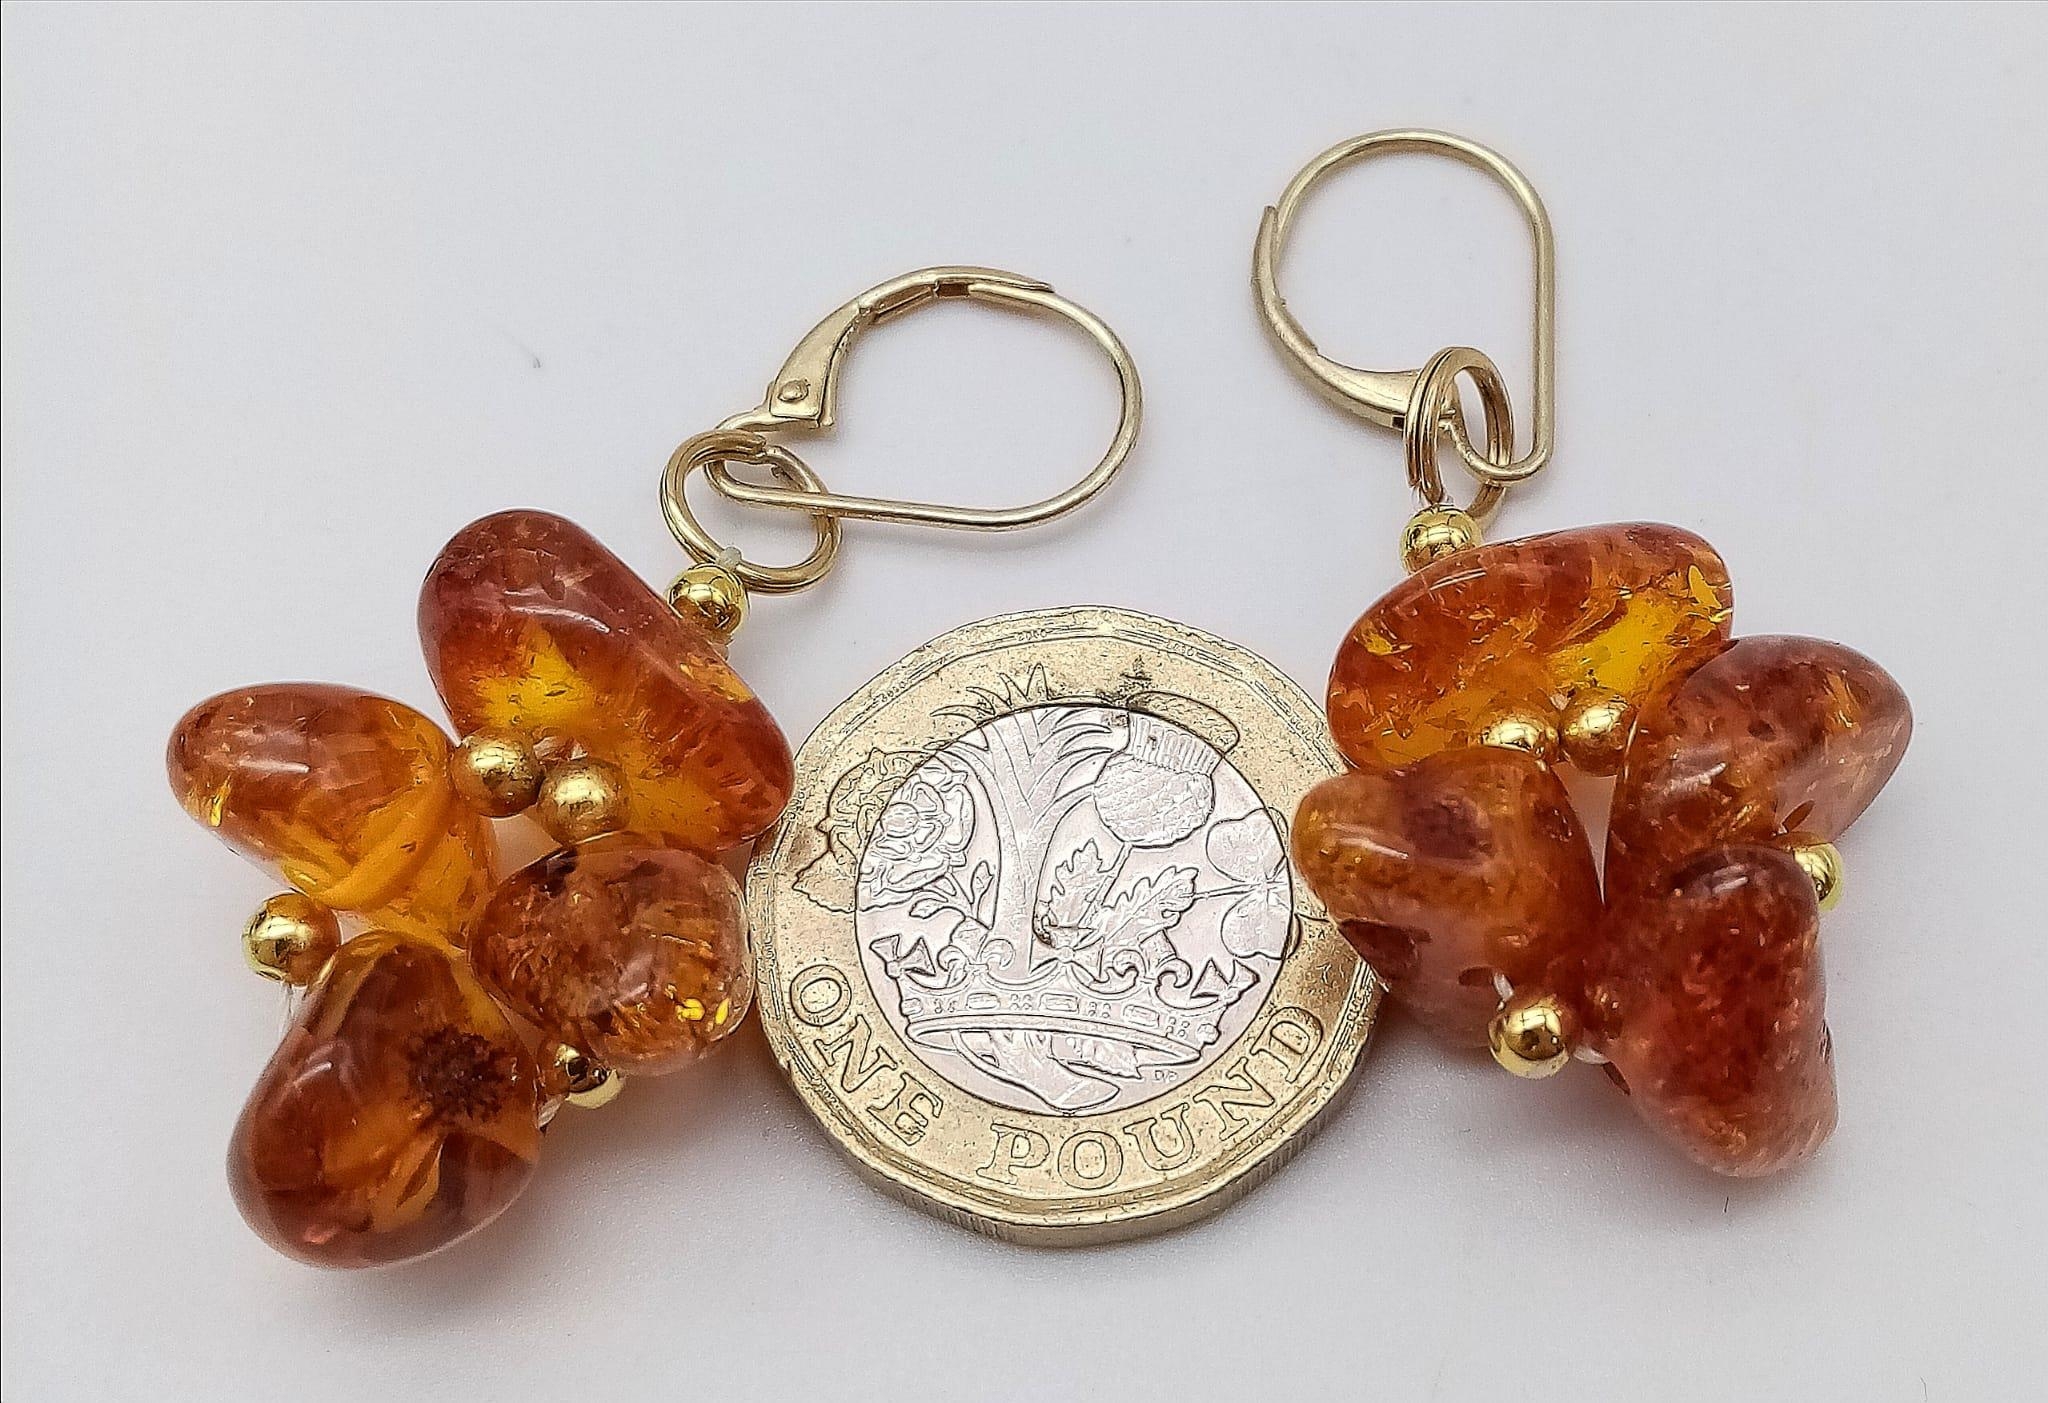 A Pair of Amber Cluster Earrings set in 9K Gold Earrings. 6g total weight. 3cm drop - Image 4 of 4